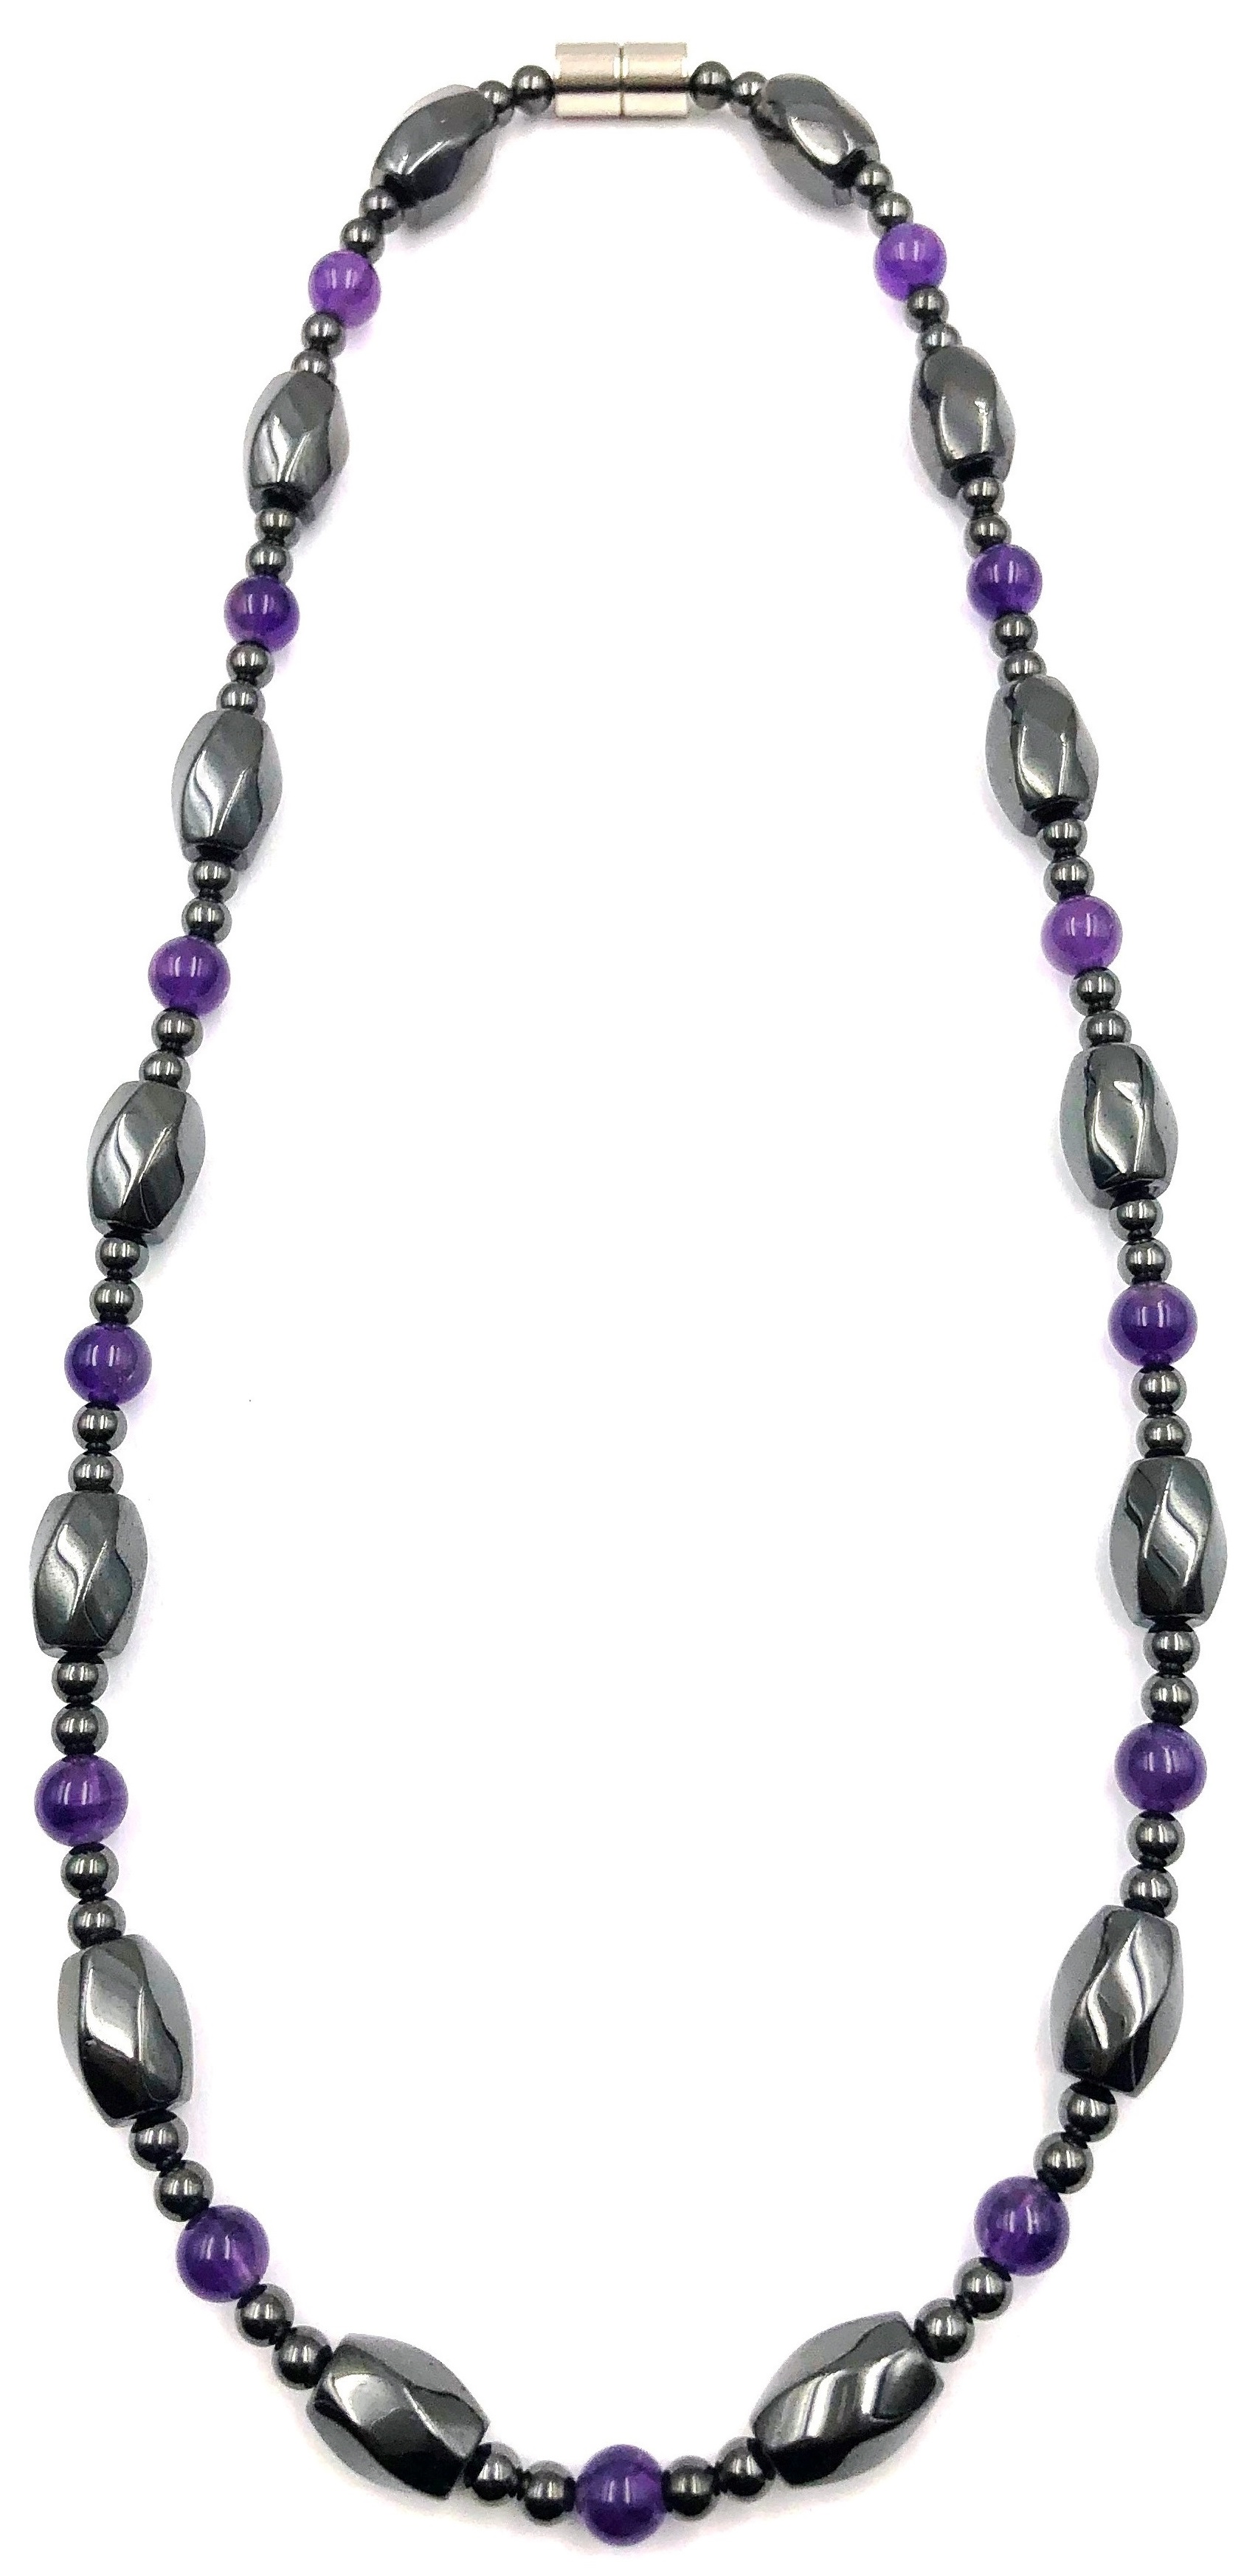 1 PC. Amethyst Magnetic Necklace For Men And Women # MN-0015